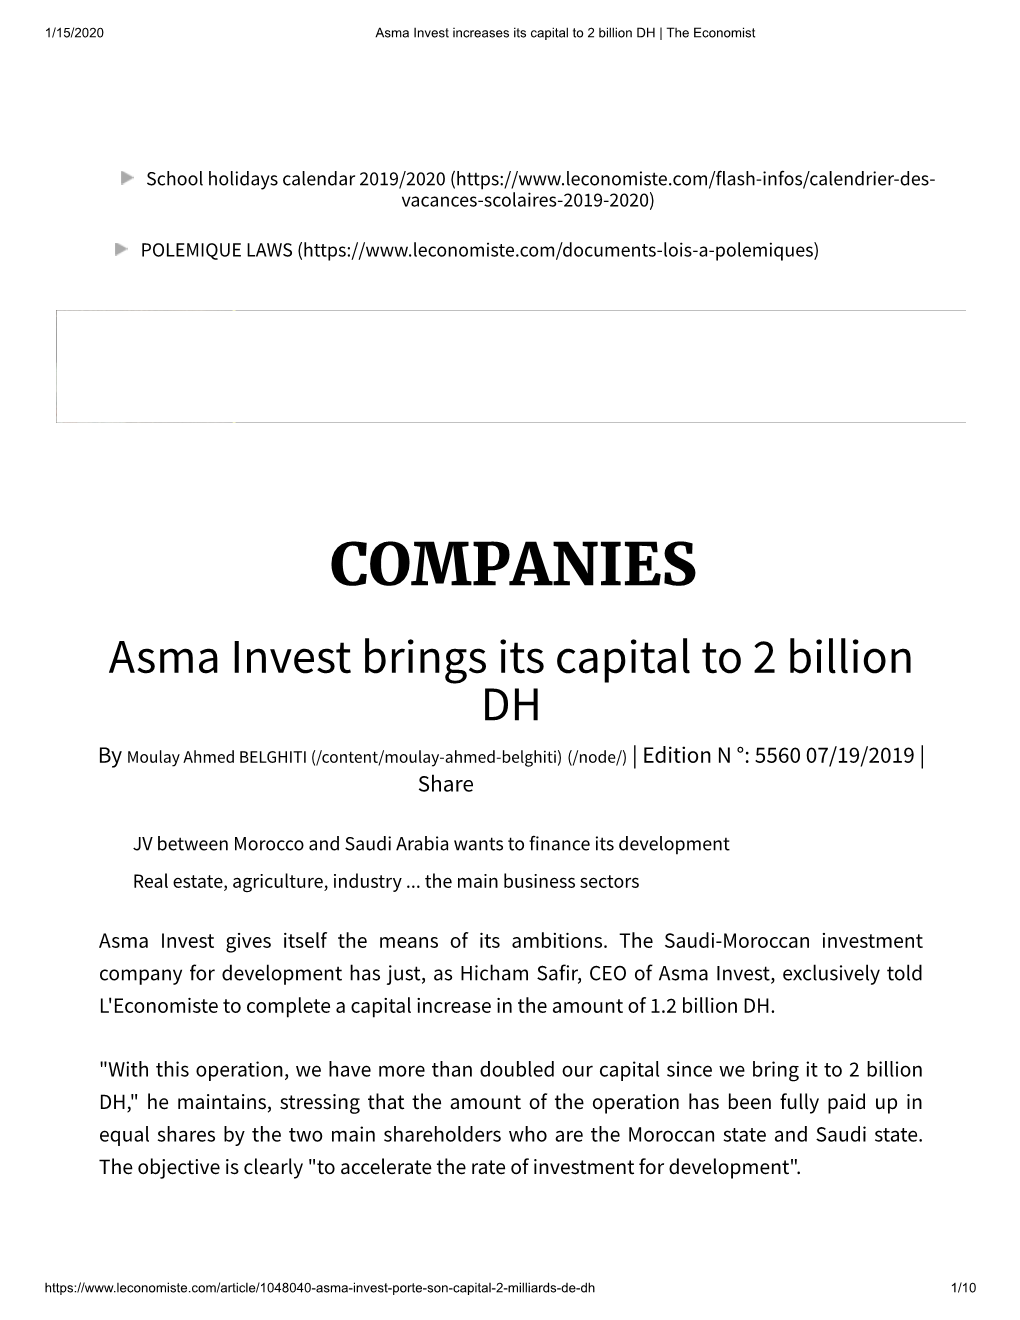 COMPANIES Asma Invest Brings Its Capital to 2 Billion DH by Moulay Ahmed BELGHITI (/Content/Moulay-Ahmed-Belghiti) (/Node/) | Edition N °: 5560 07/19/2019 | Share